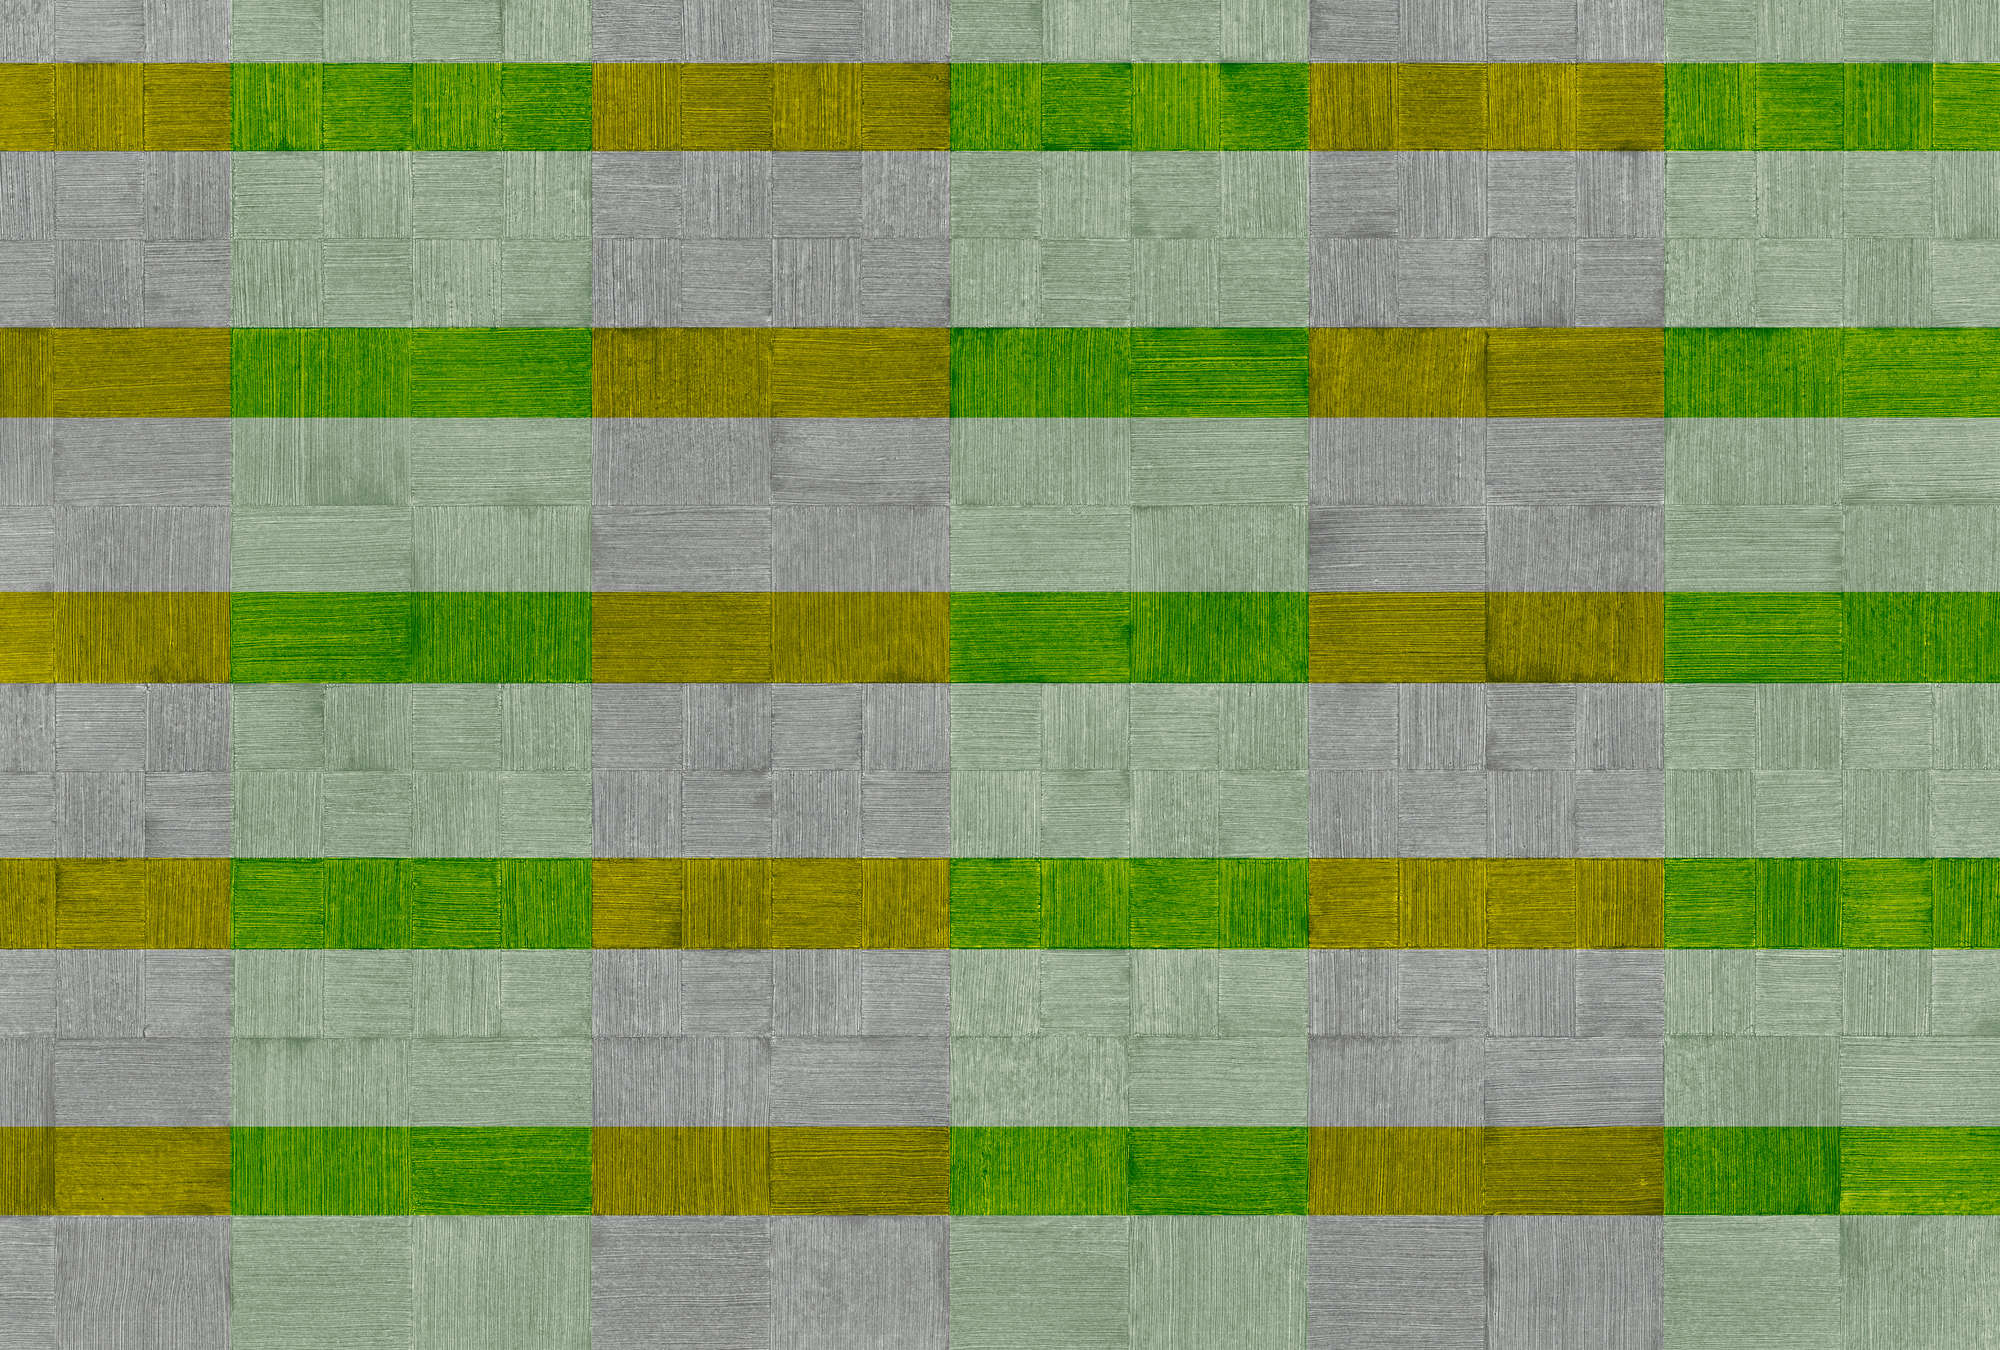             Photo wallpaper Strife & Structure Pattern - Green, Grey
        